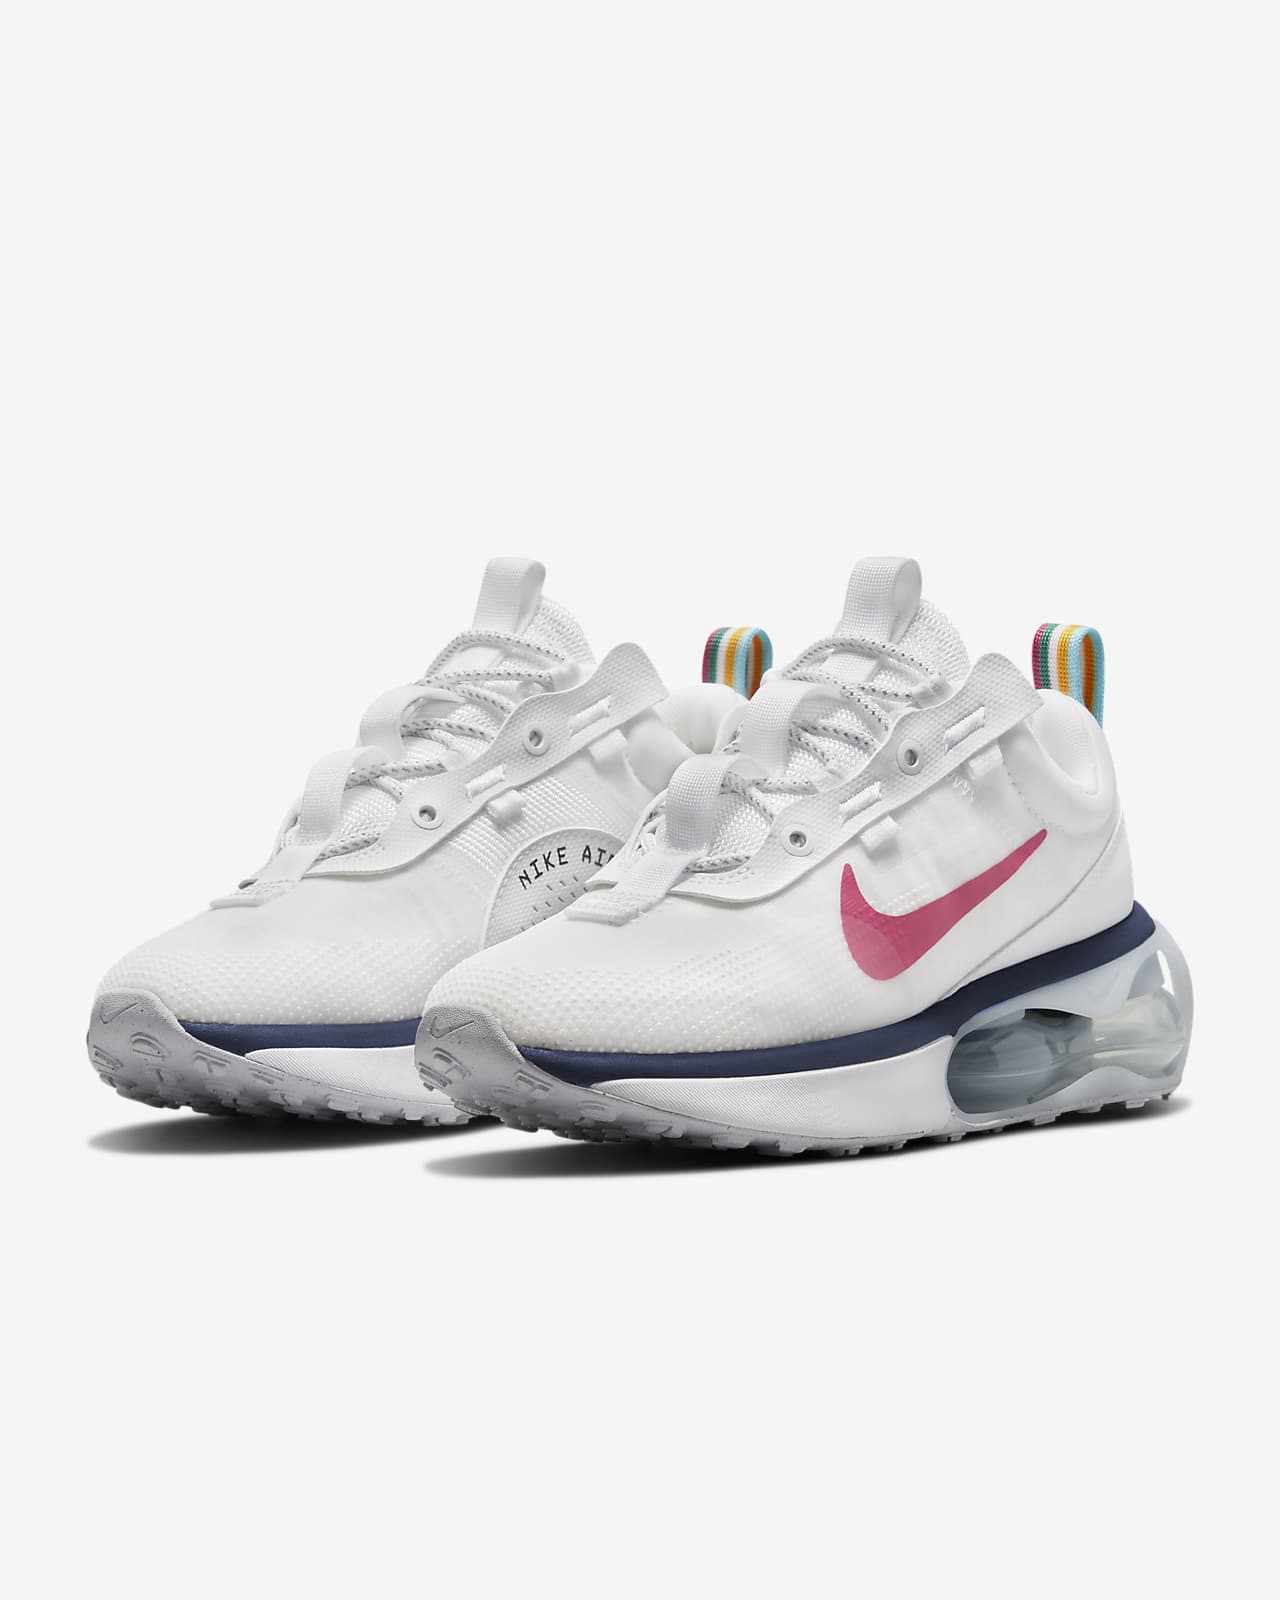 nike air max shoes images with price